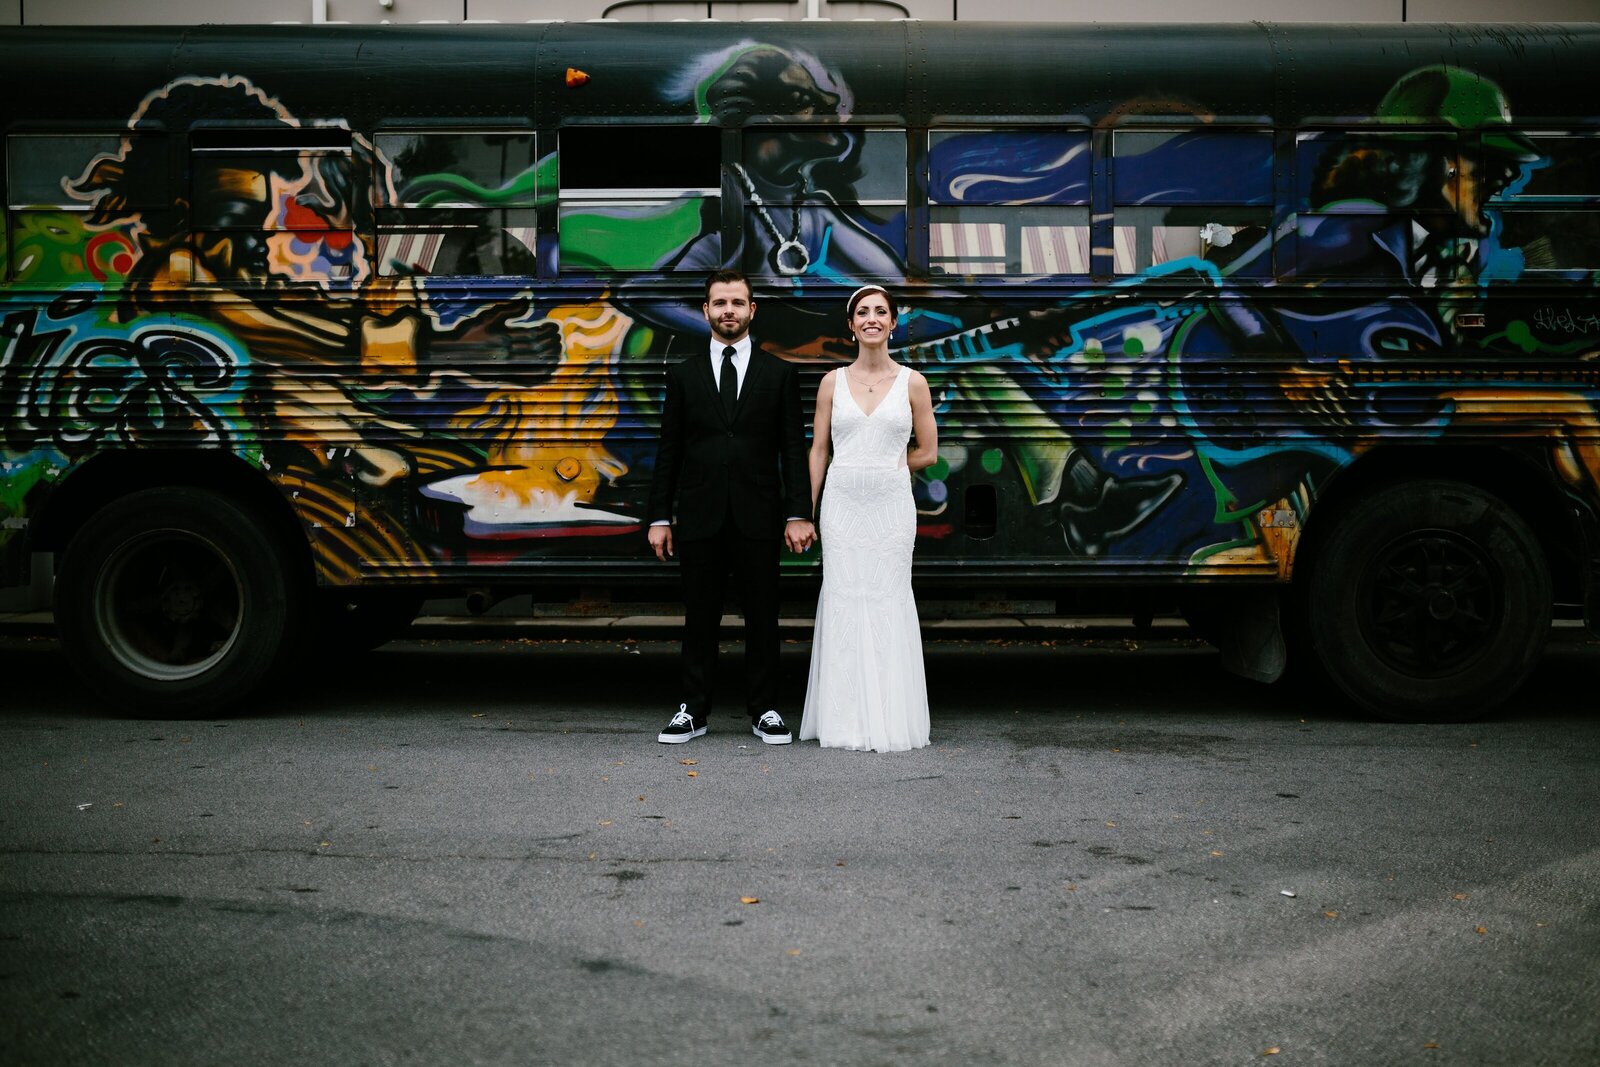 Bride and groom pose for portrait in front of bus covered in graffiti